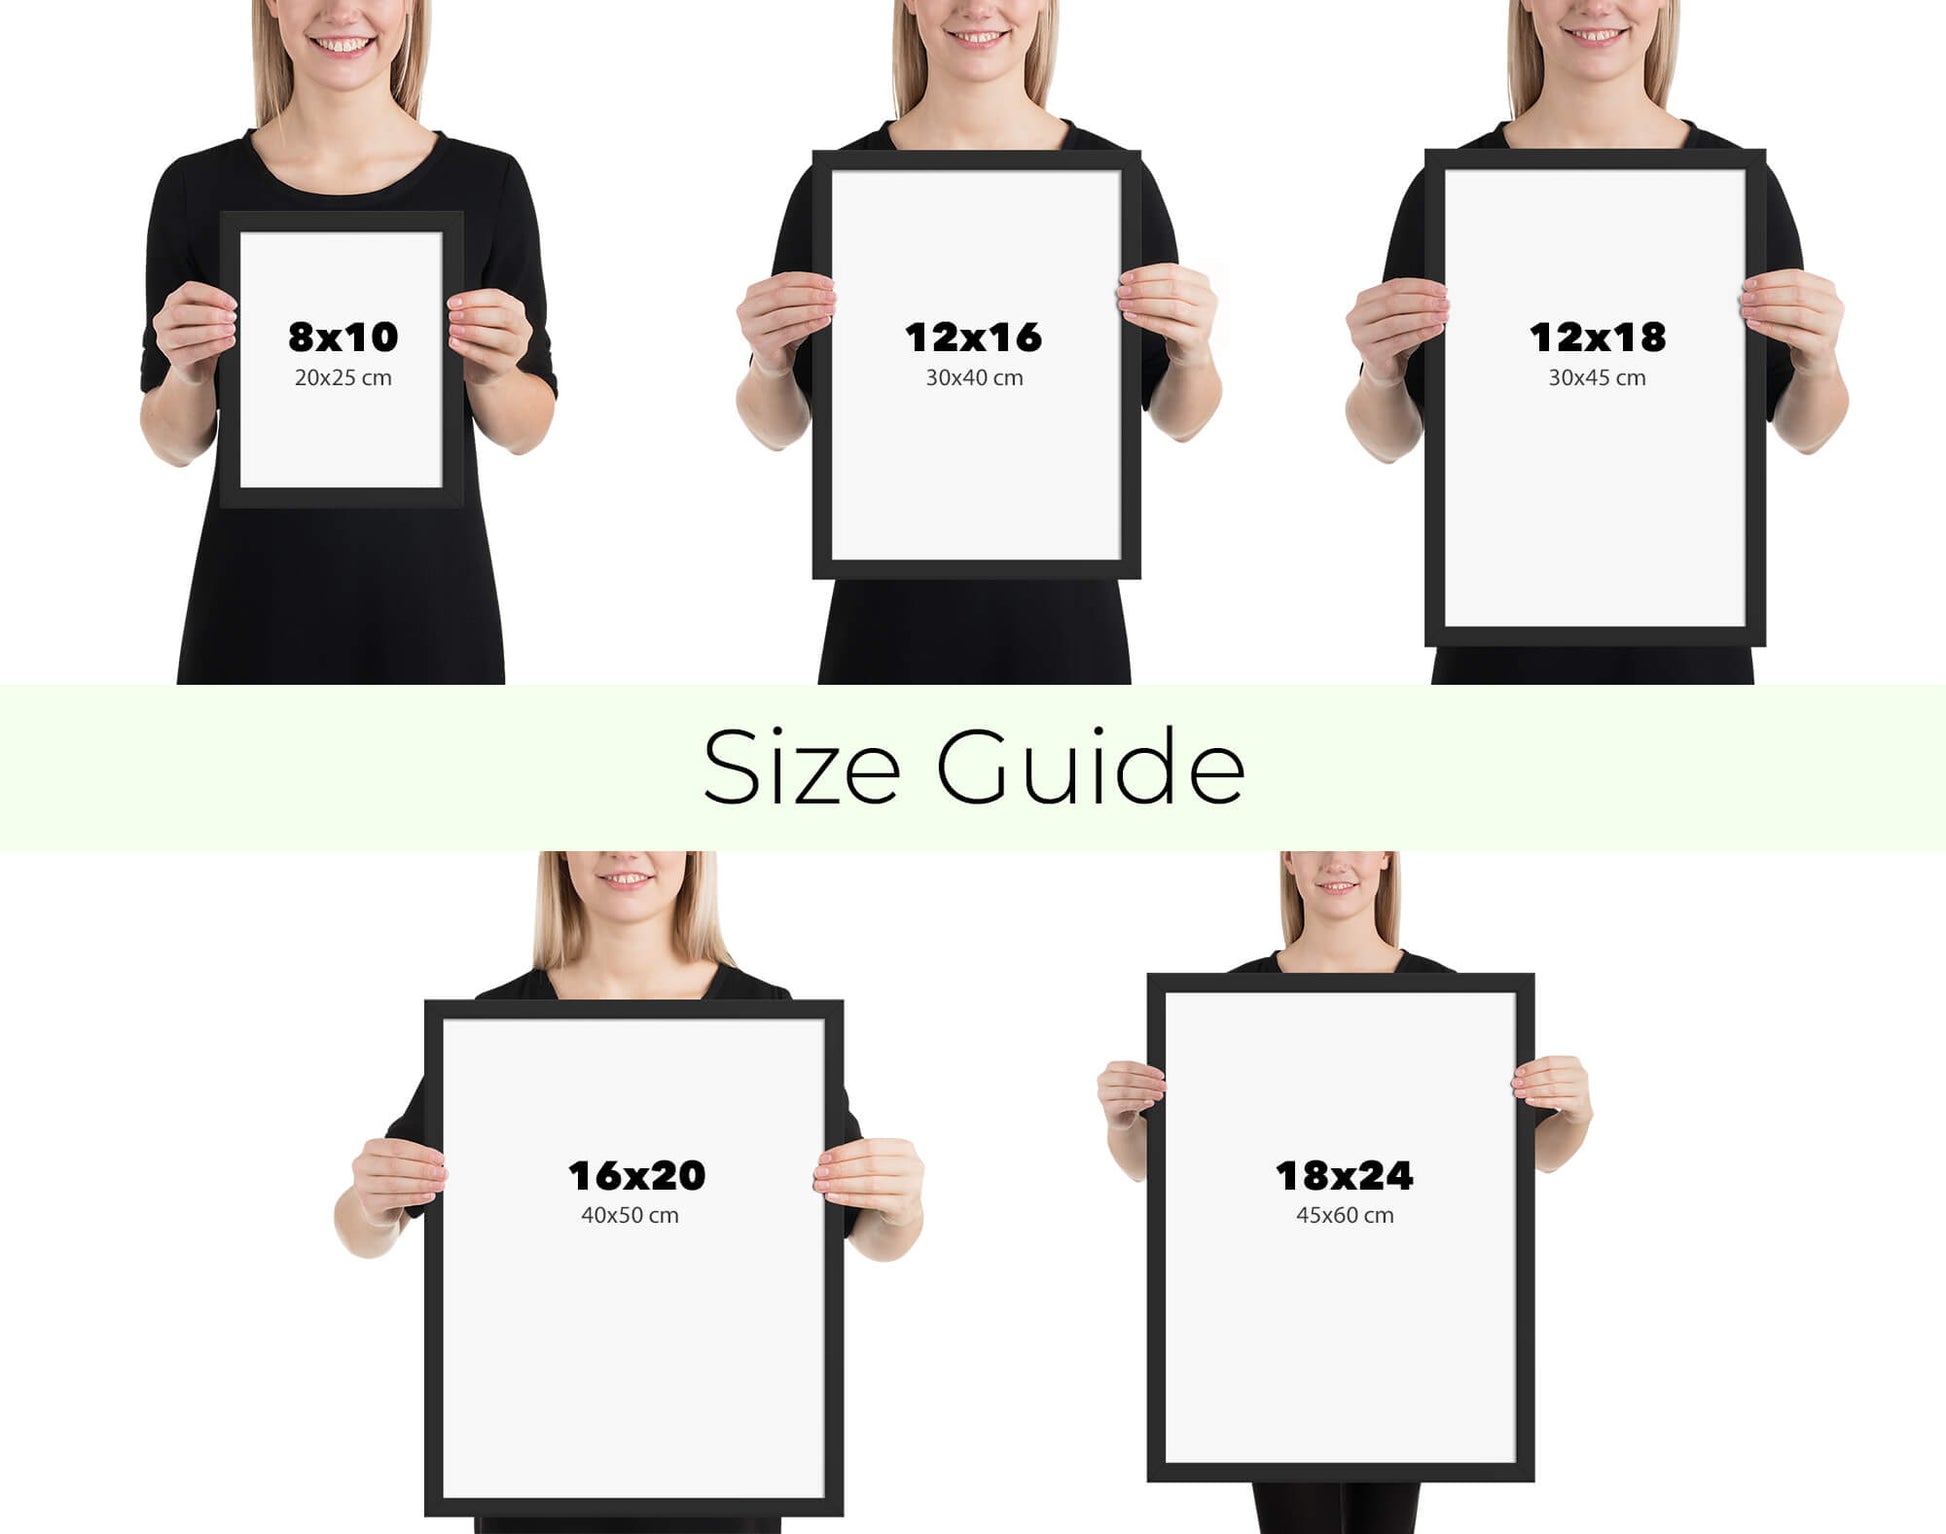 Size guide vinyl records